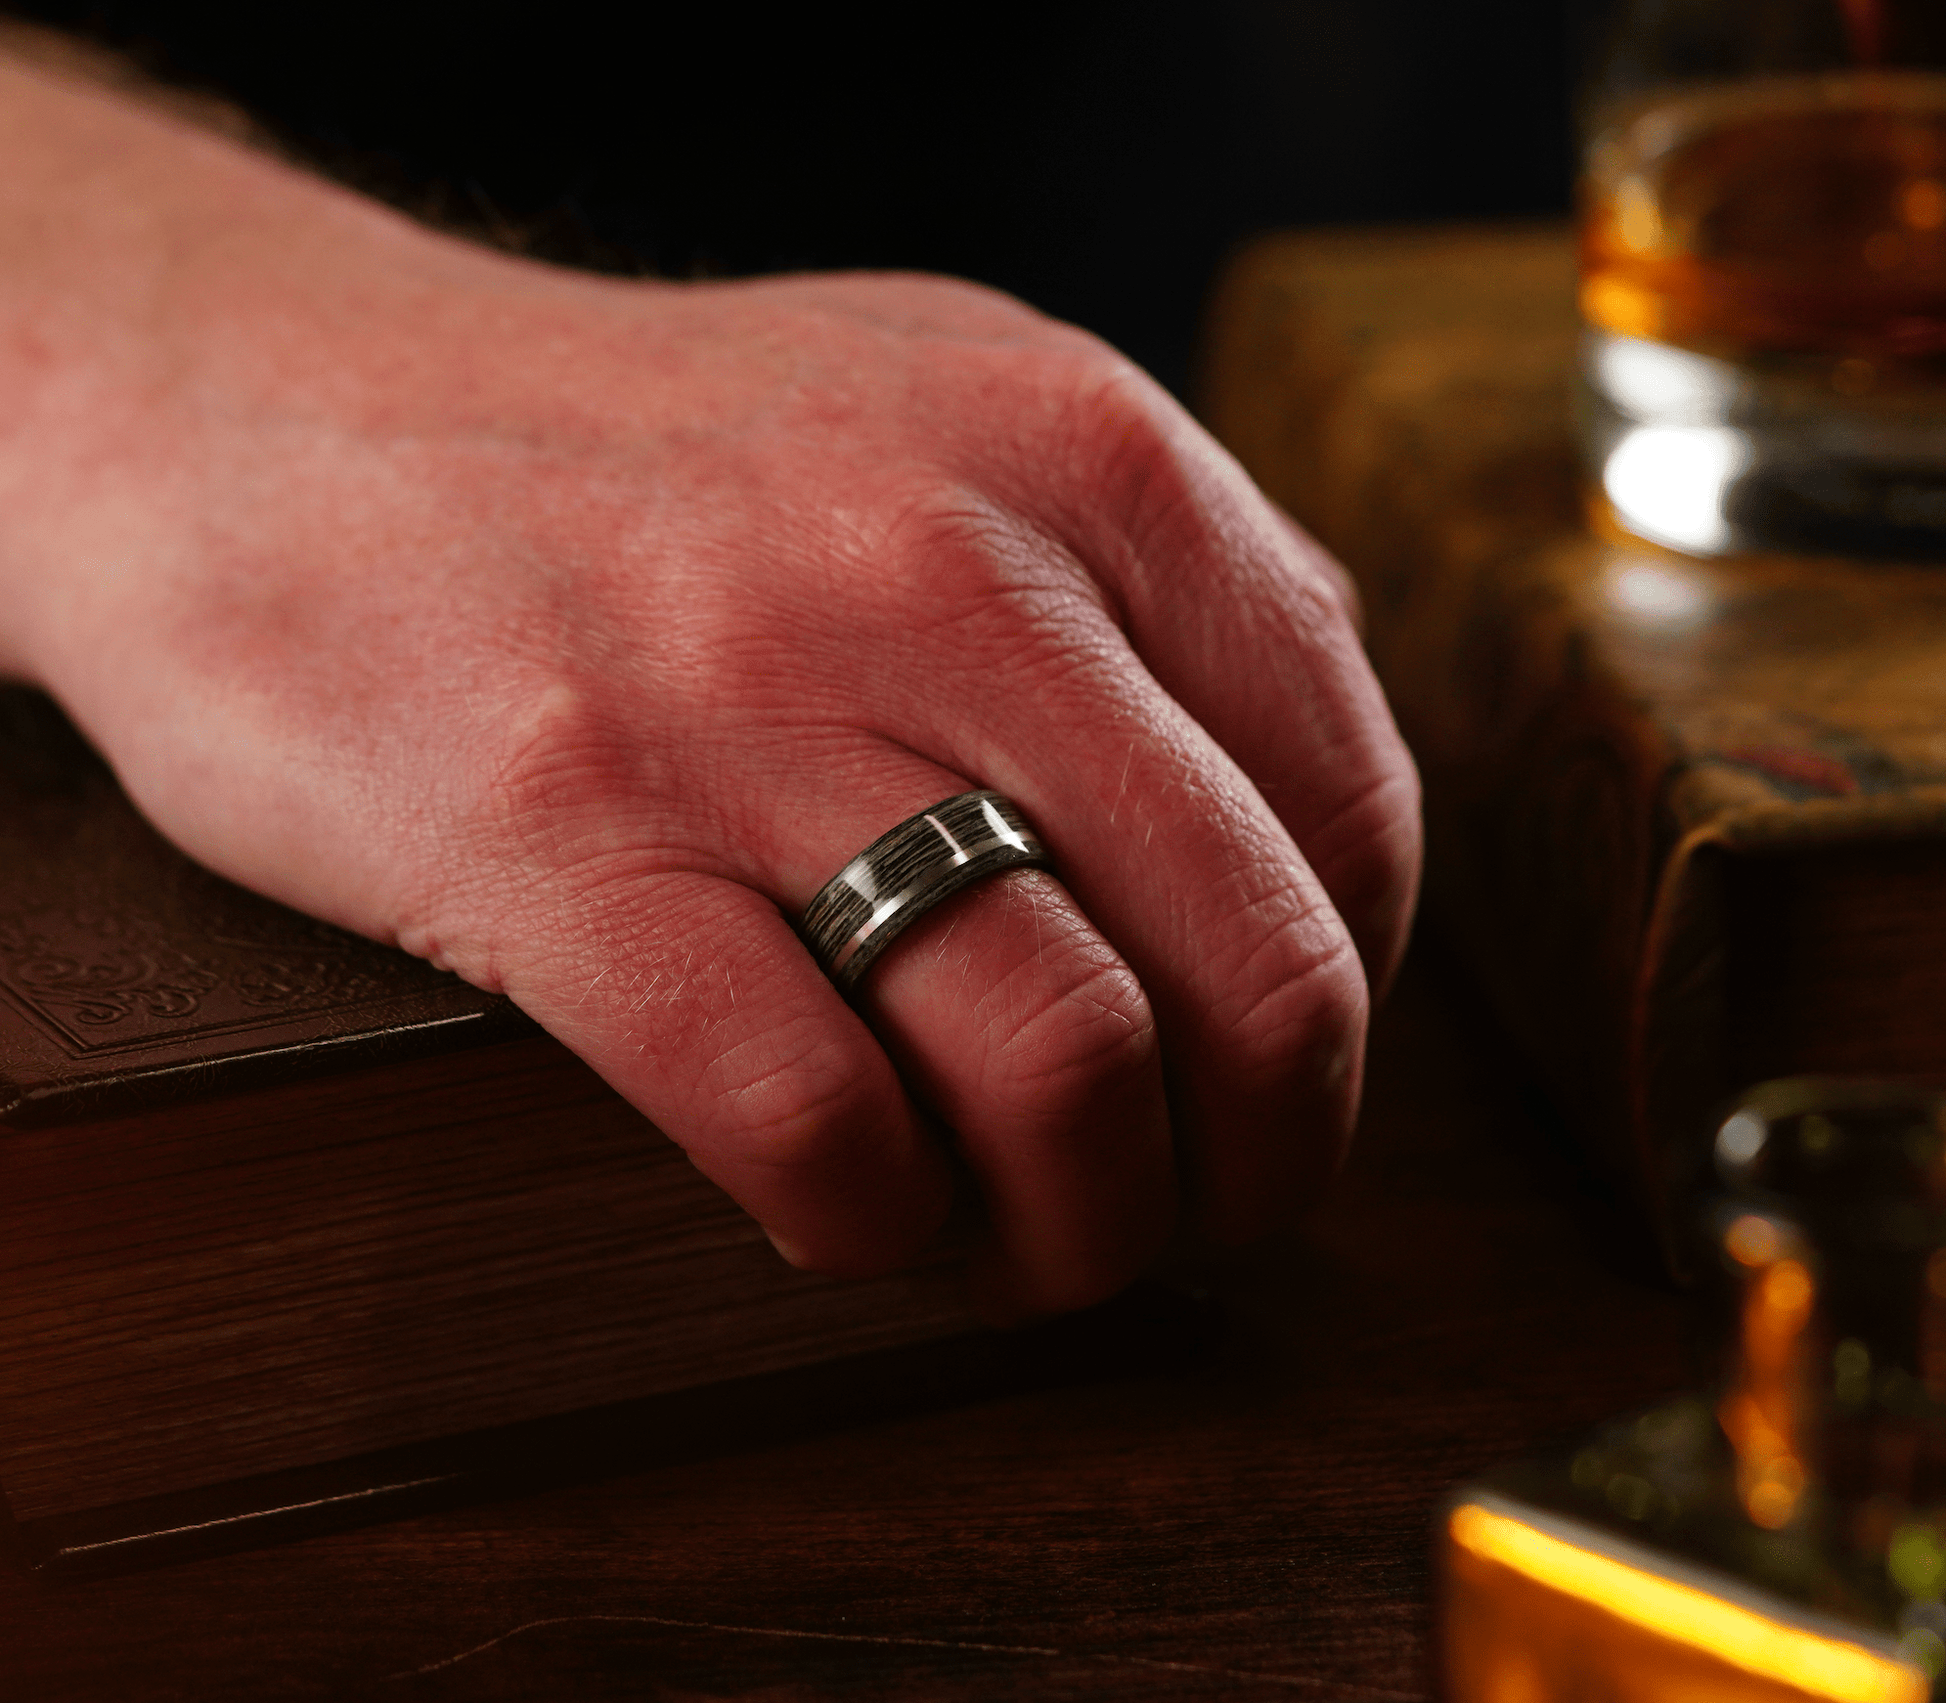 The Clark - Men's Wedding Rings - Manly Bands